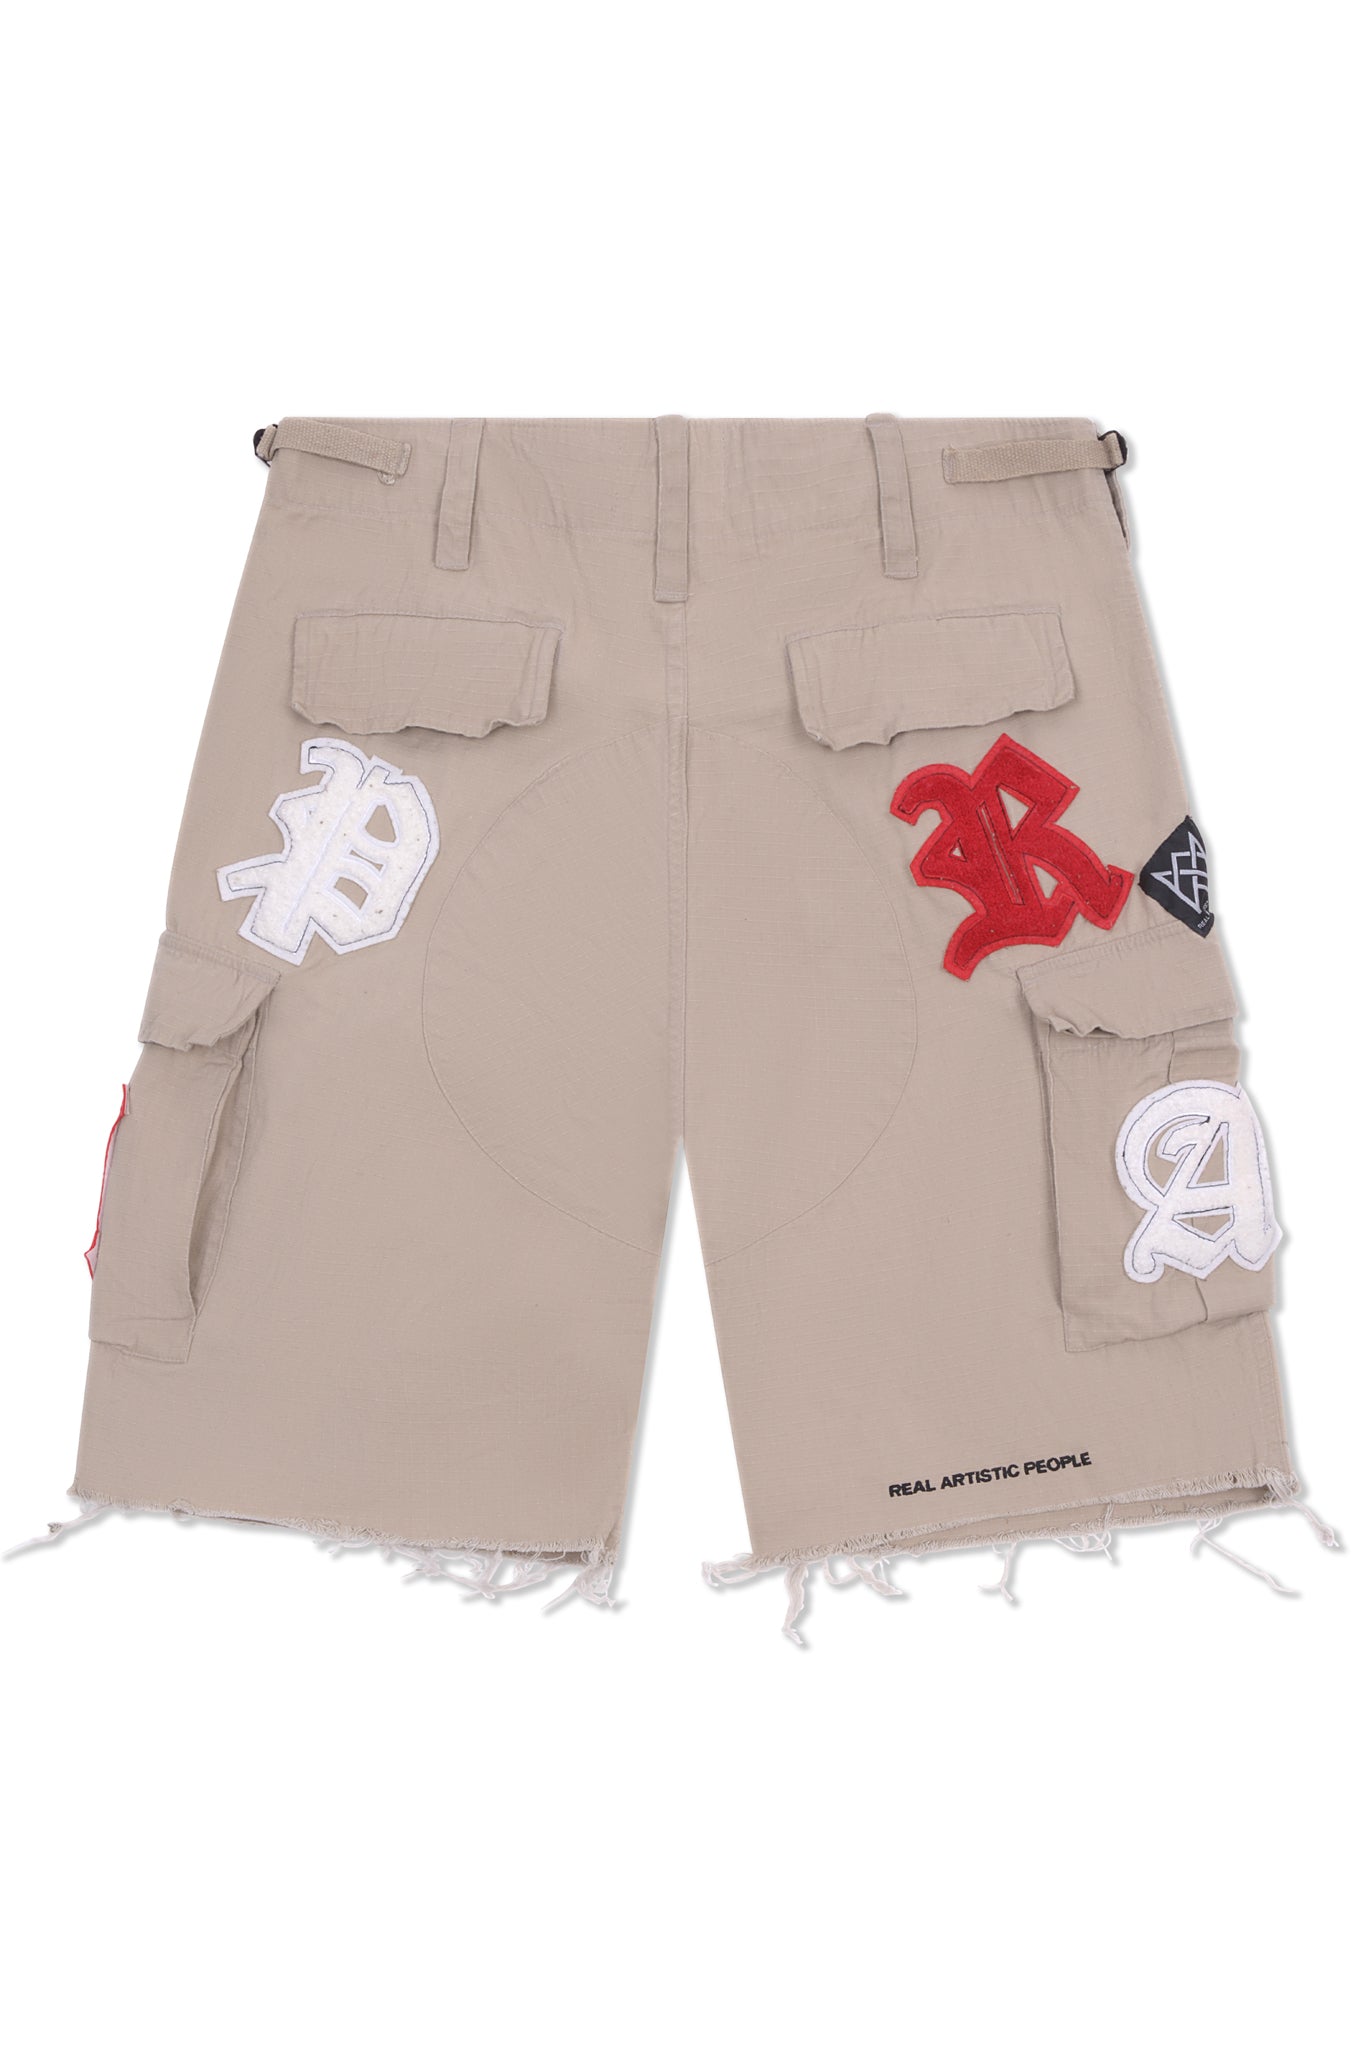 Real Artistic People - Cargo Shorts Beige